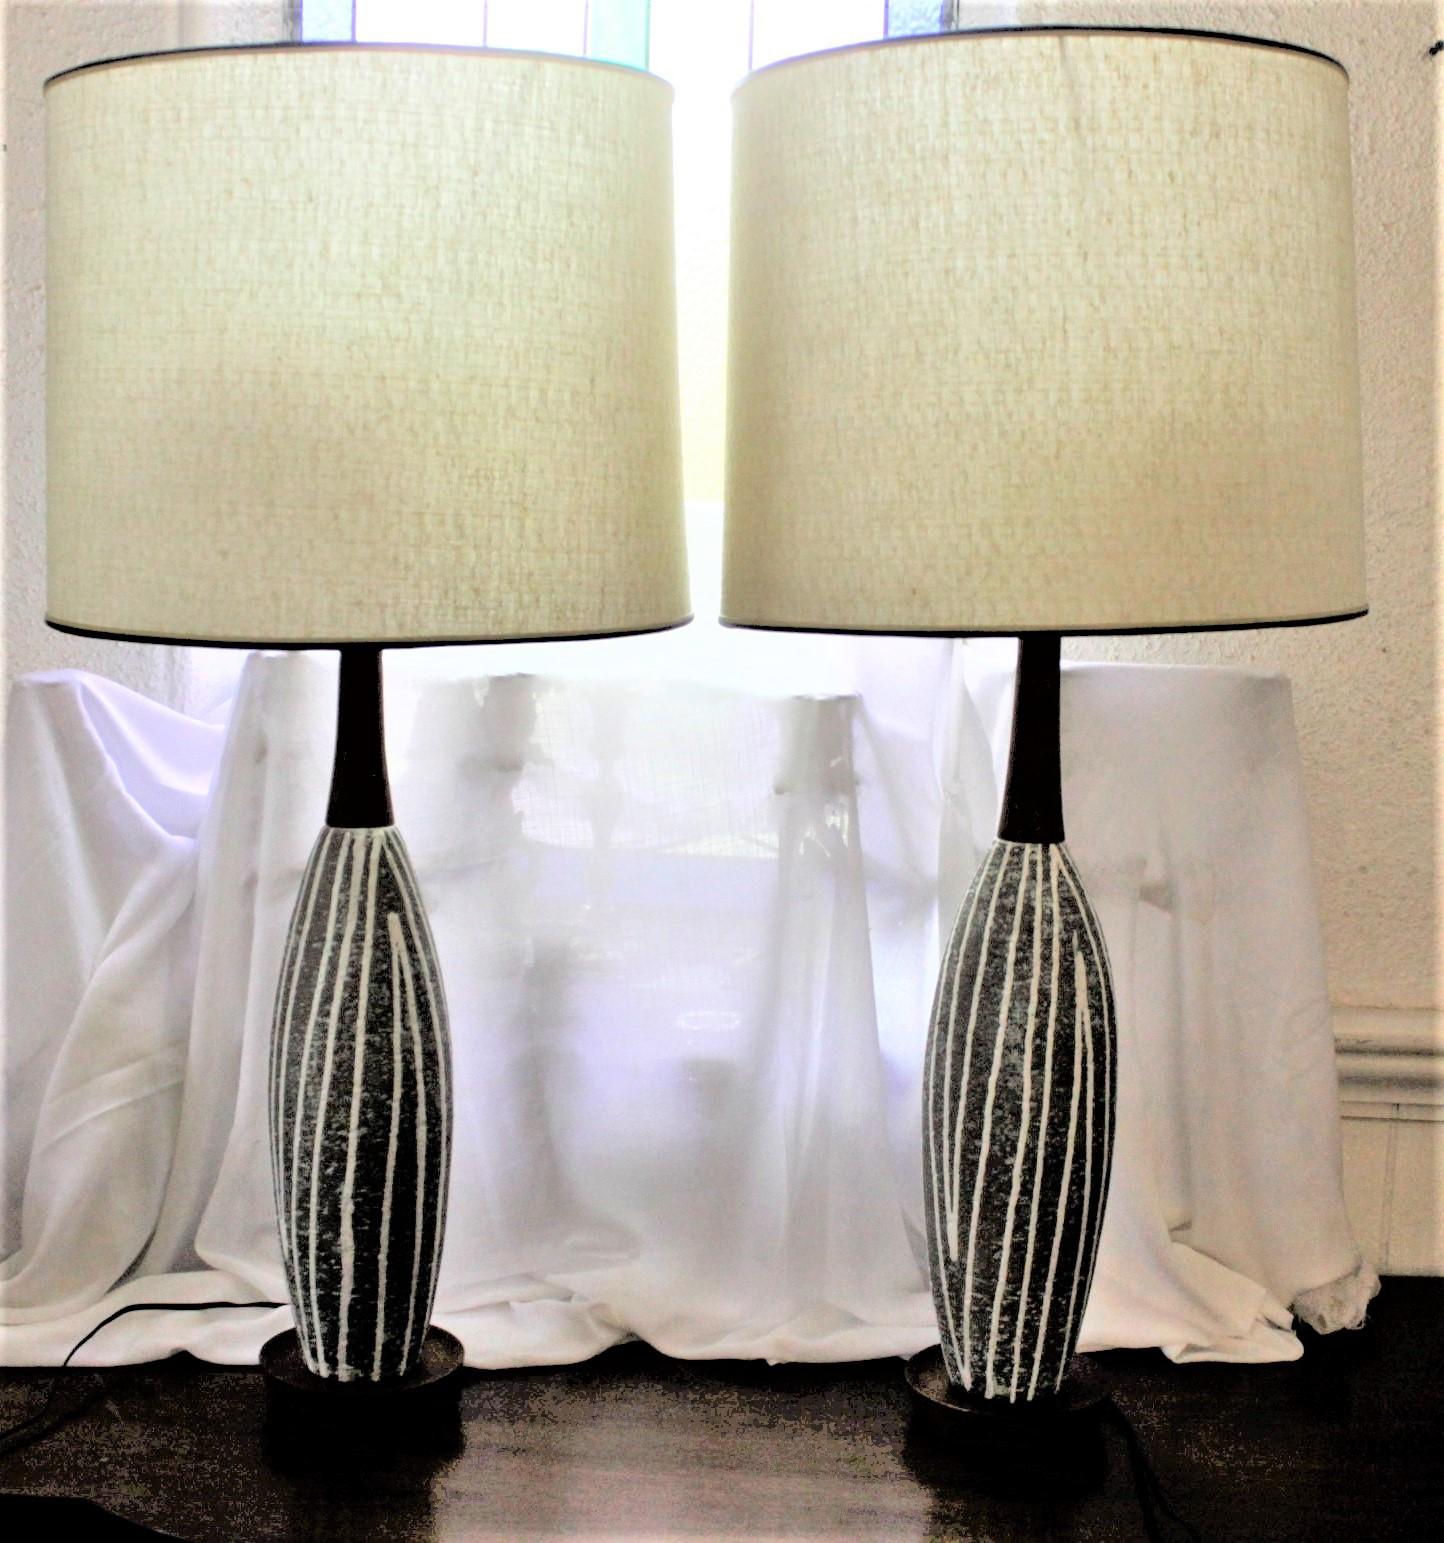 20th Century Pair of Upsala Ekeby Mid-Century Modern Pottery Table Lamps & Original Shades For Sale